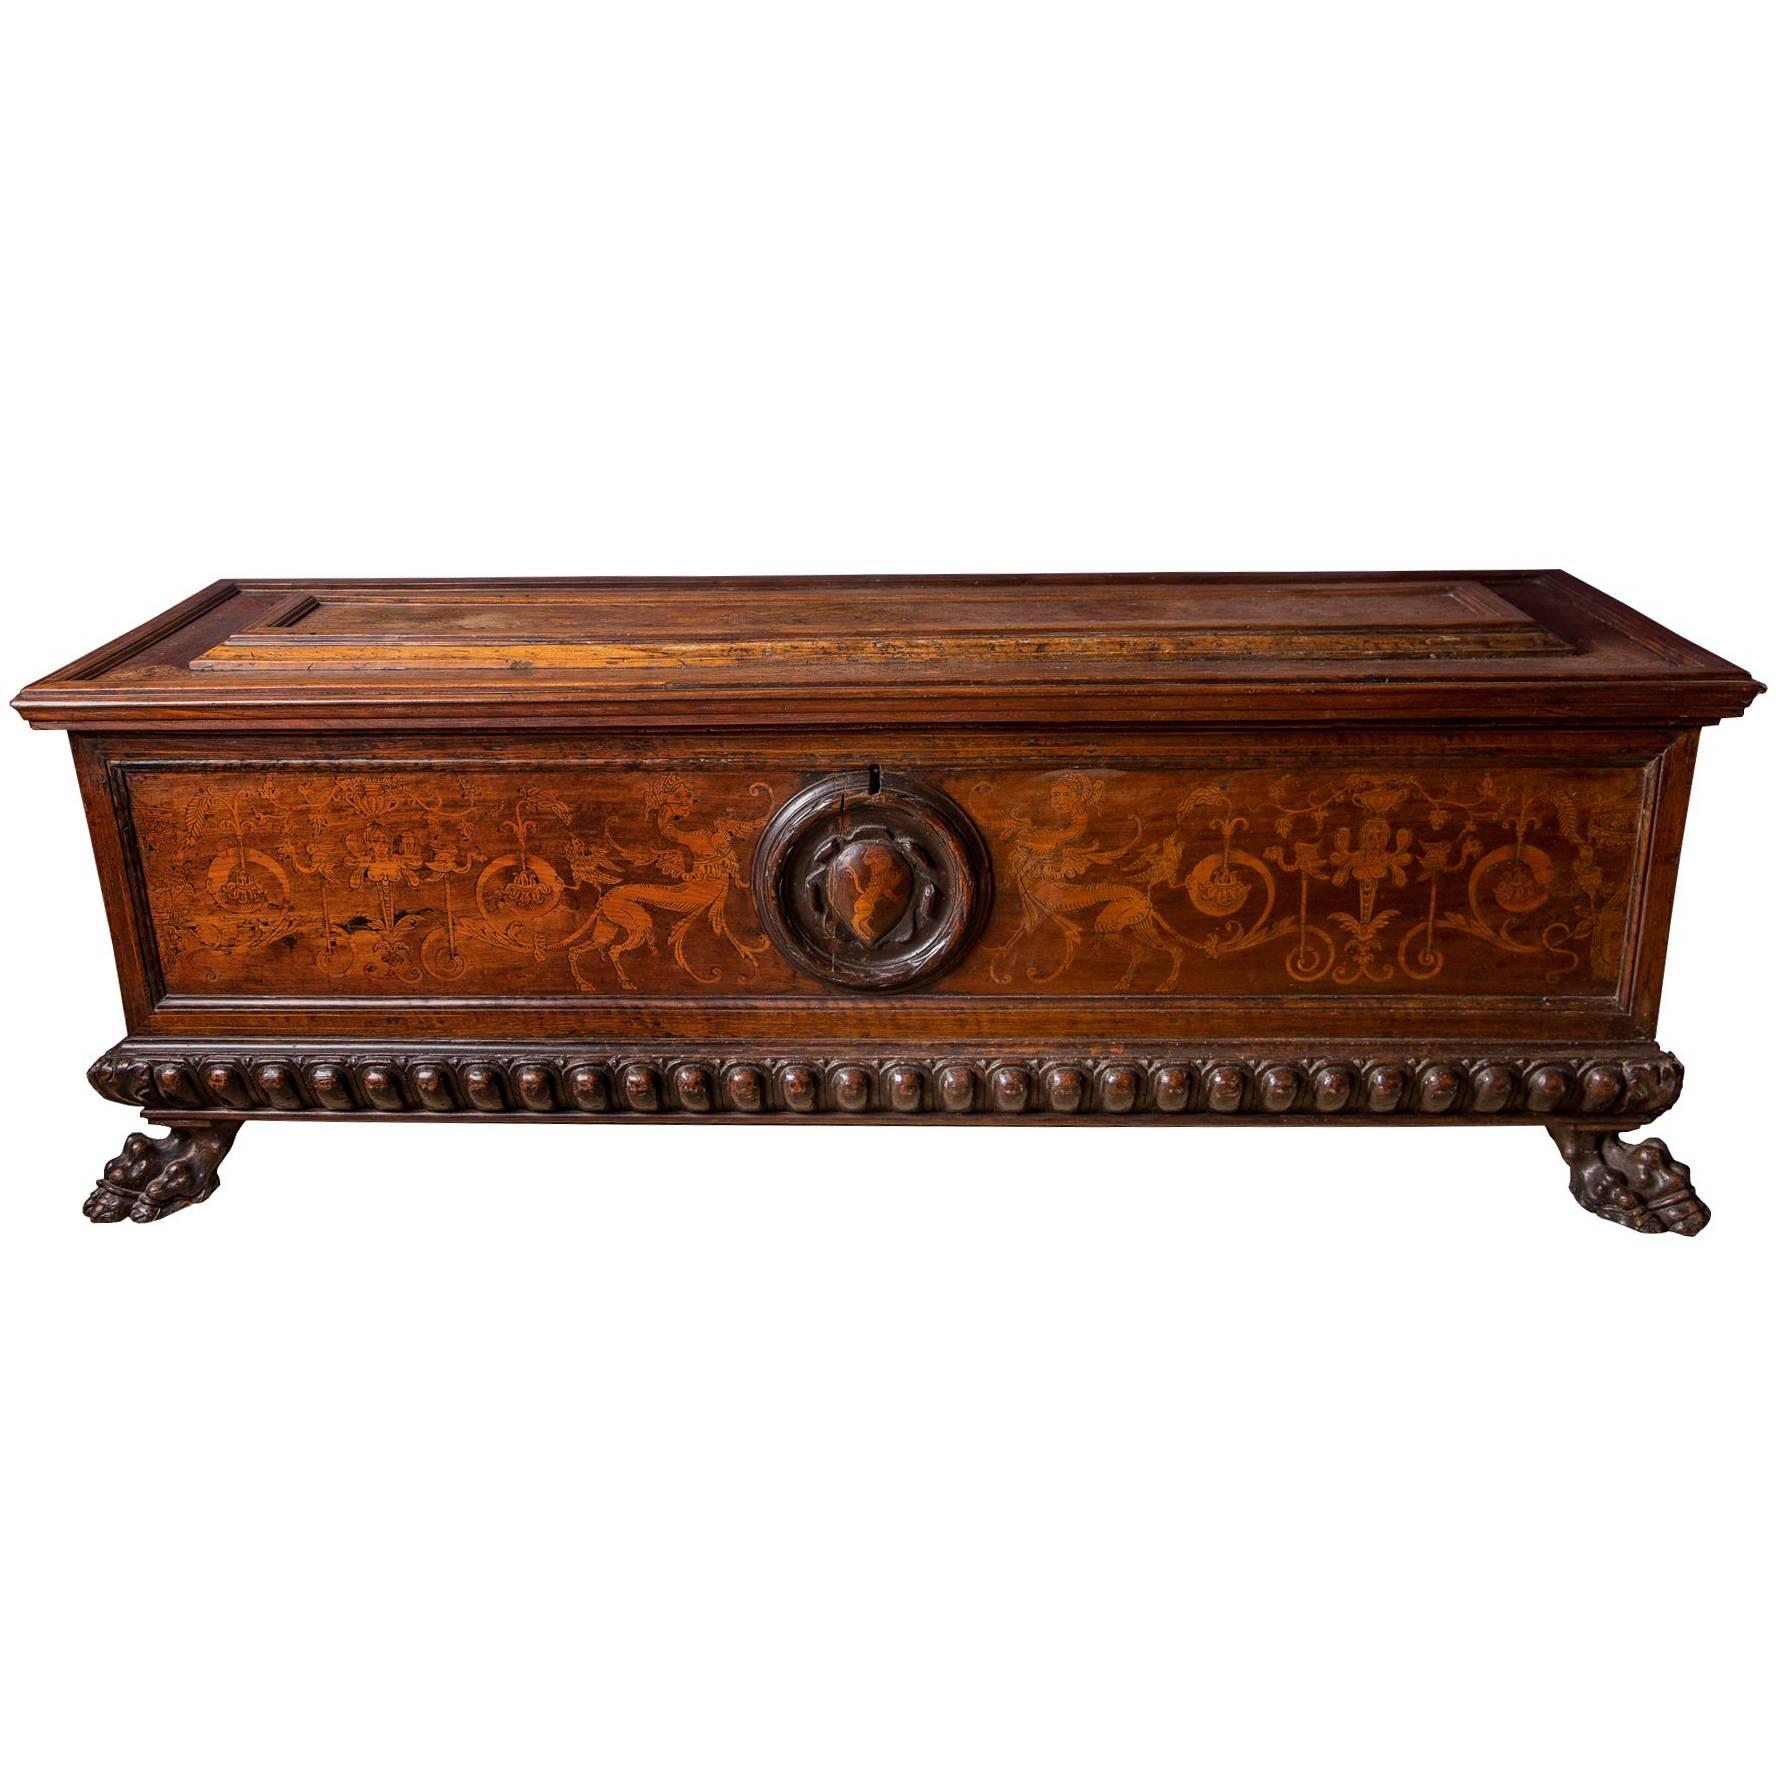 Italian Baroque Walnut Cassone Inlaid with Engraved Fruitwood Marquetry, 17th C For Sale